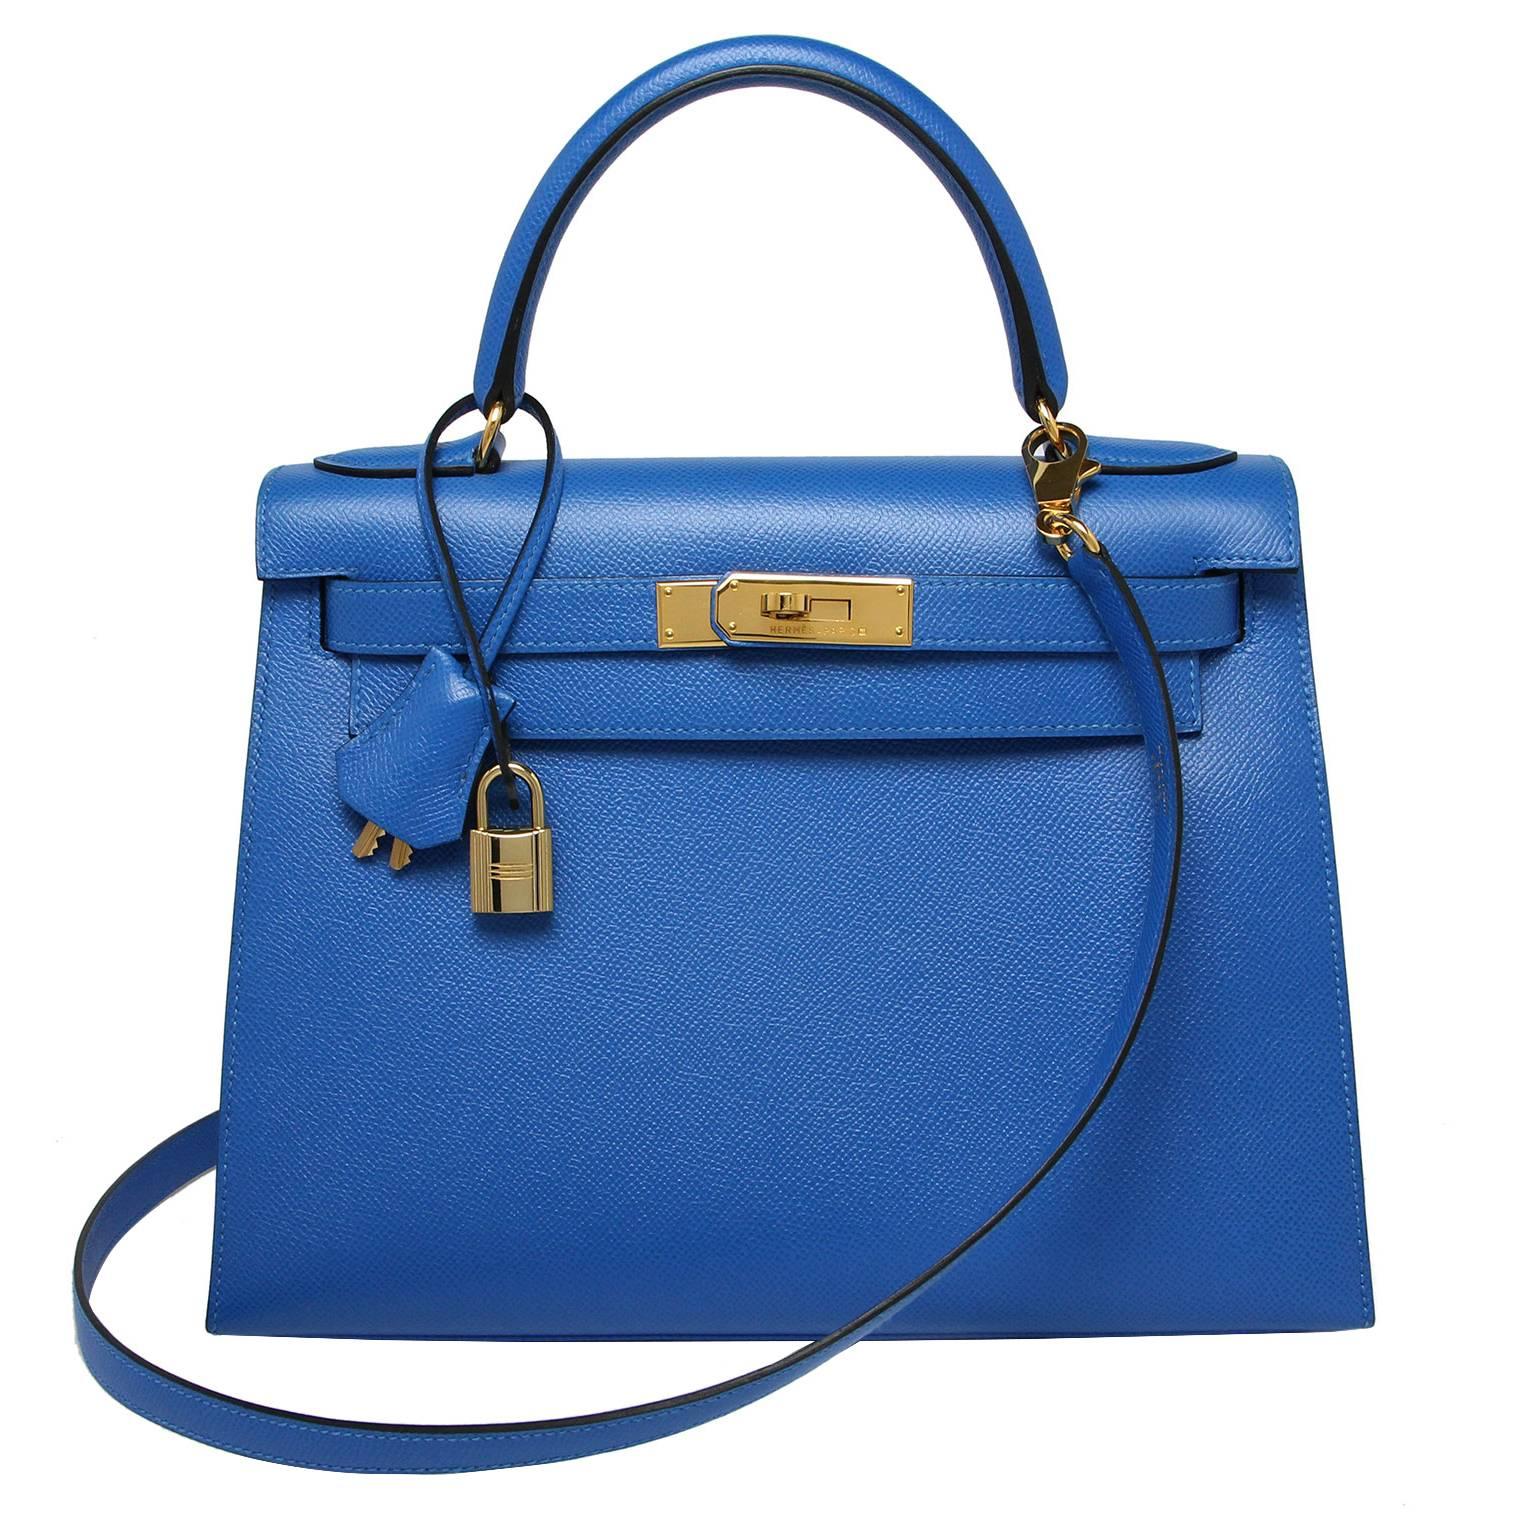 Hermes Kelly sellier 28cm french blue 
Courchevel leather
Gold hardware 
Stamp: A Square 1997 
Comes with Hermes cloth bag, clochette, lock & keys 

